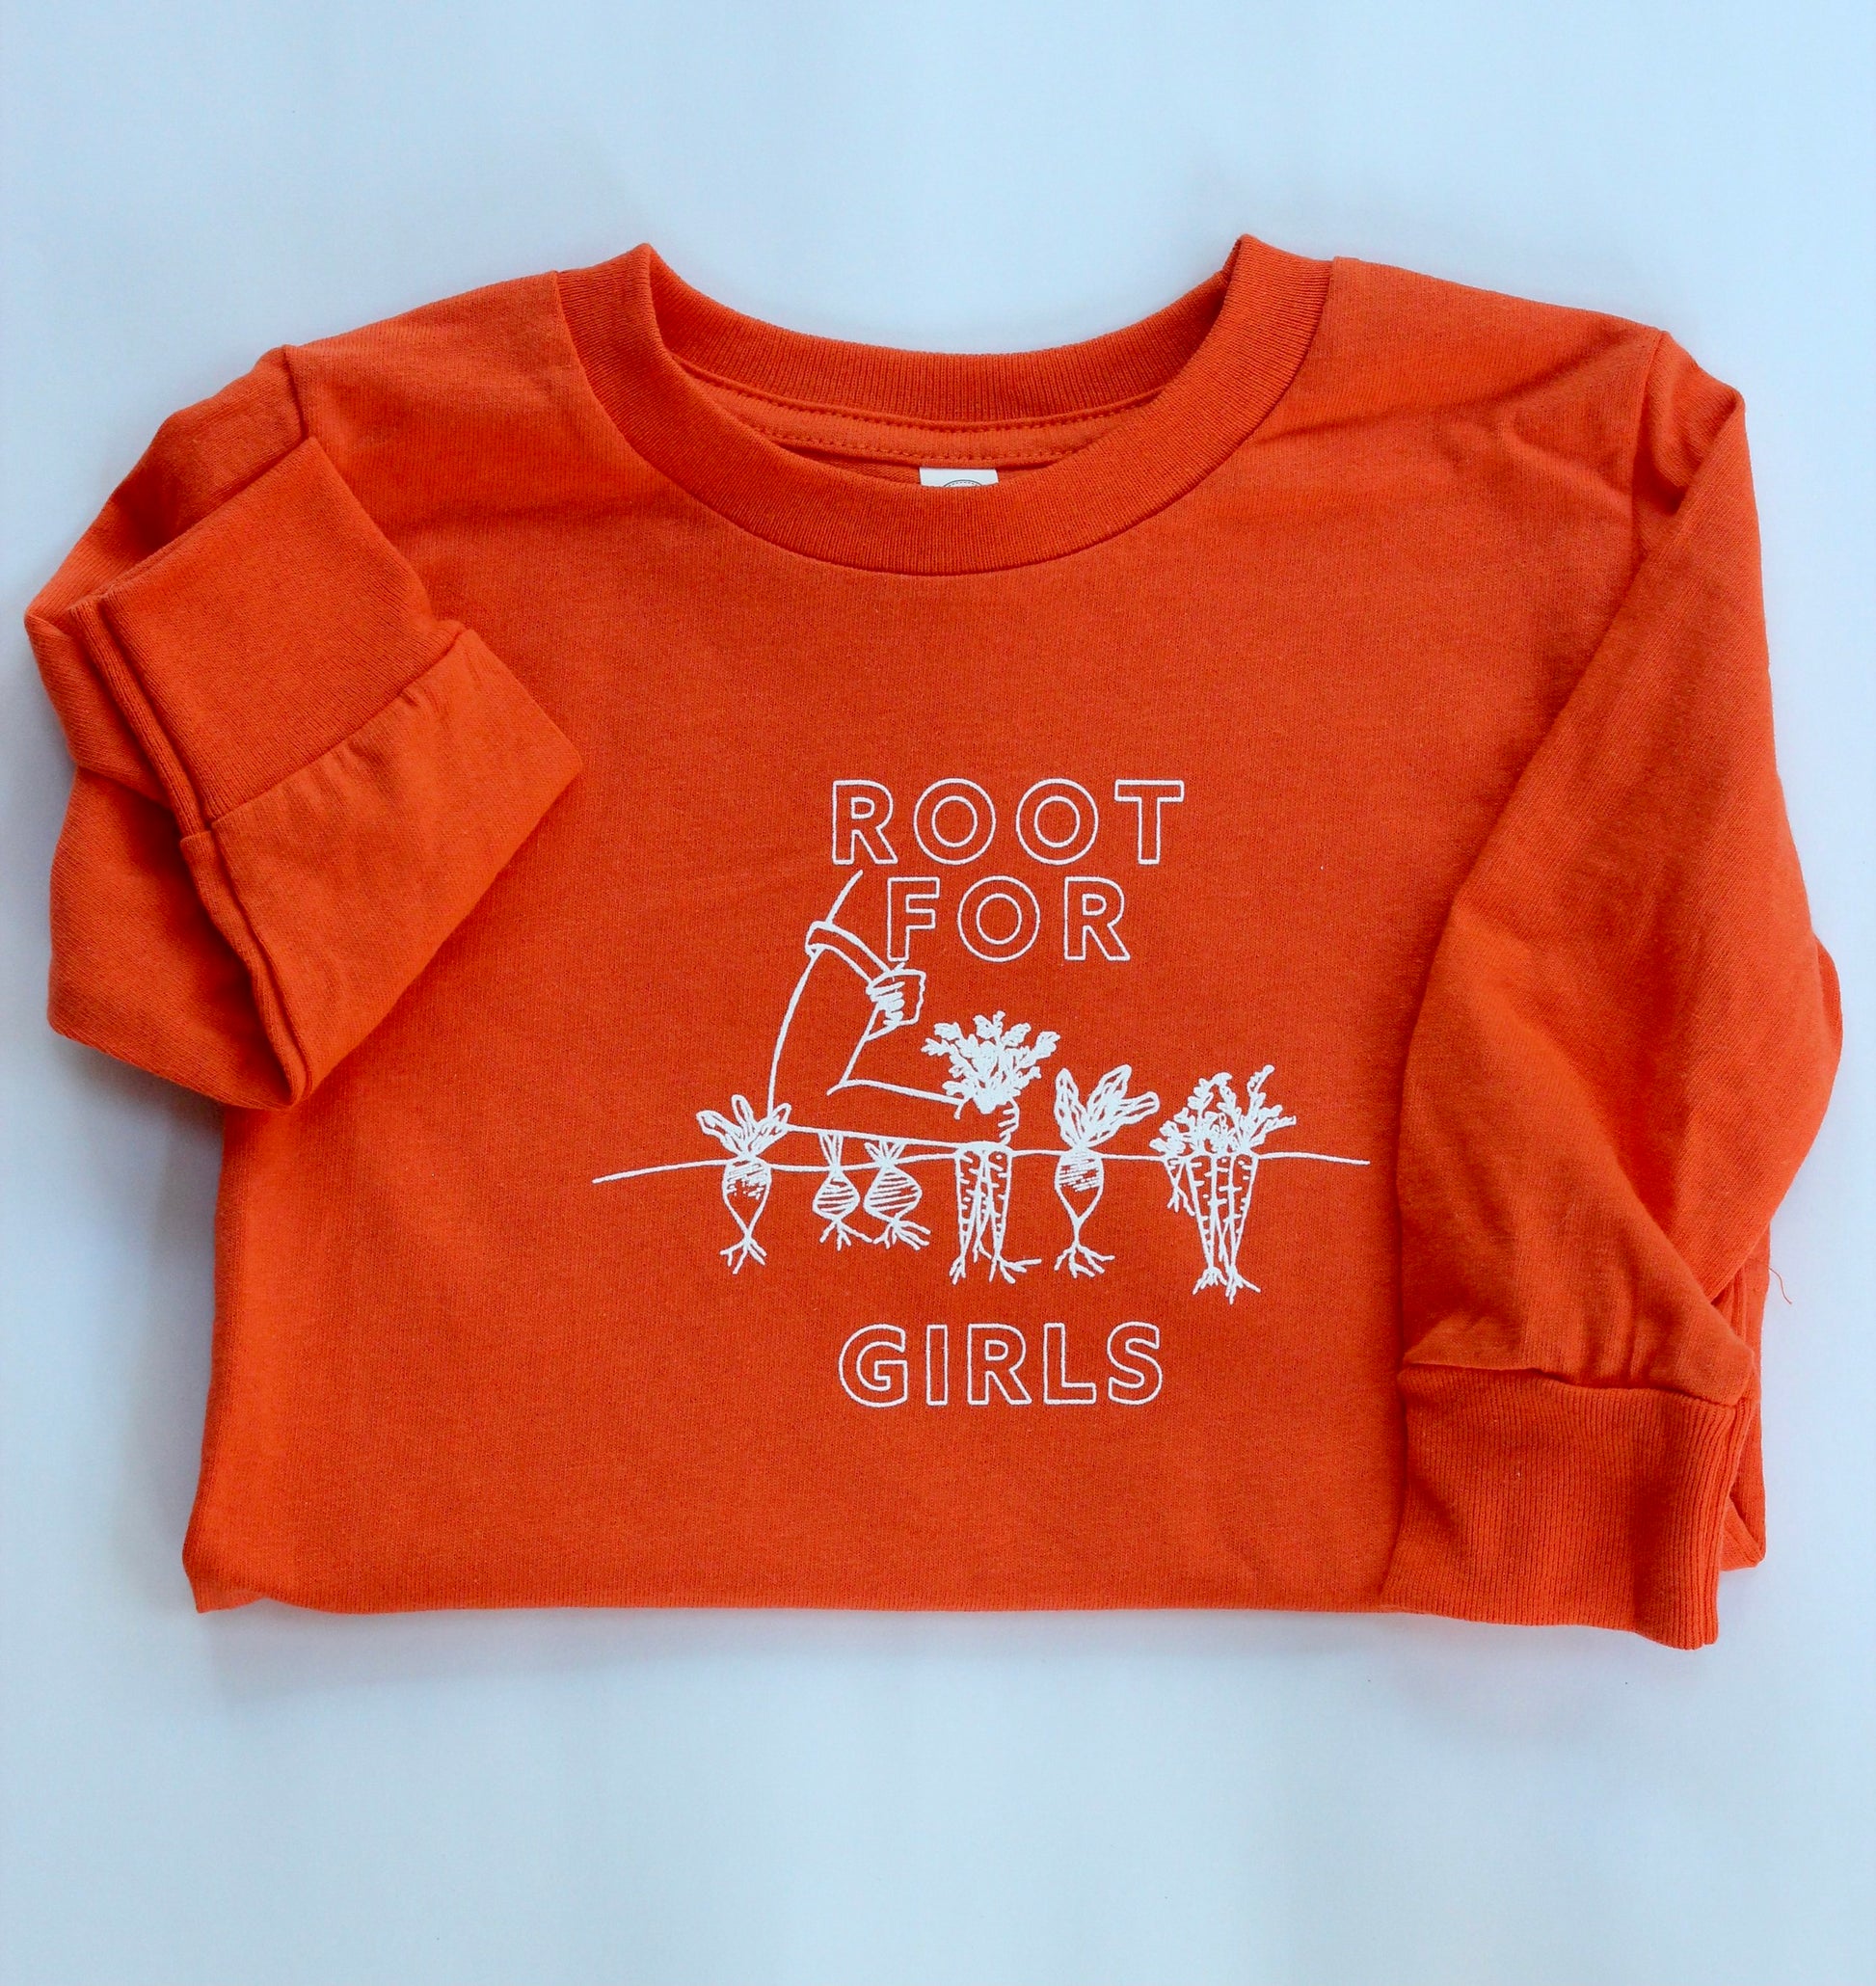 A carrot orange long sleeve toddler tee reads "Root for Girls" with a gardening graphic